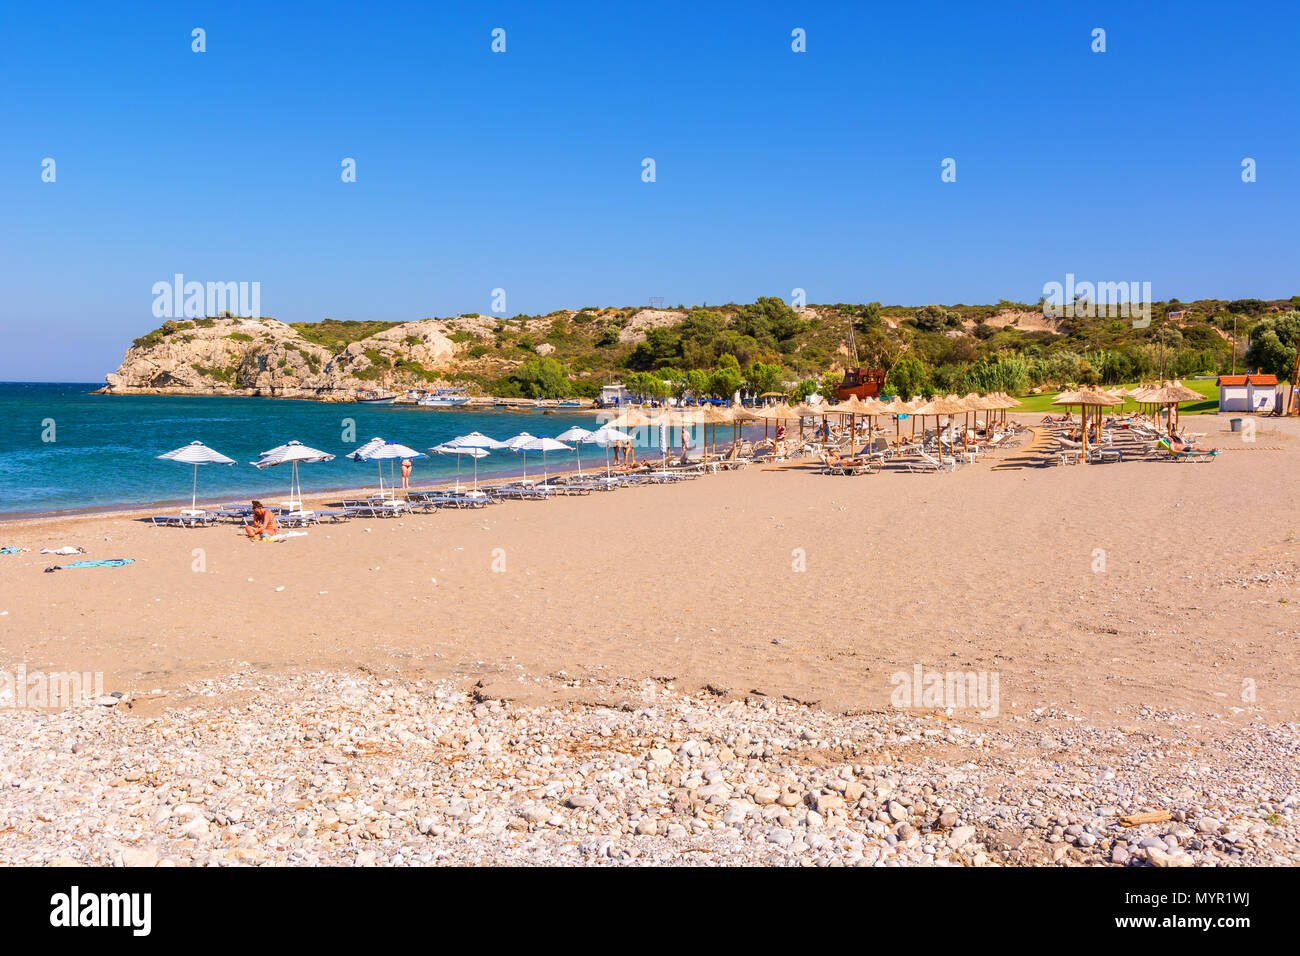 RHODES, GREECE - May 12, 2017: View of sandy beach in Kolymbia village on Rhodes island. Greece Stock Photo